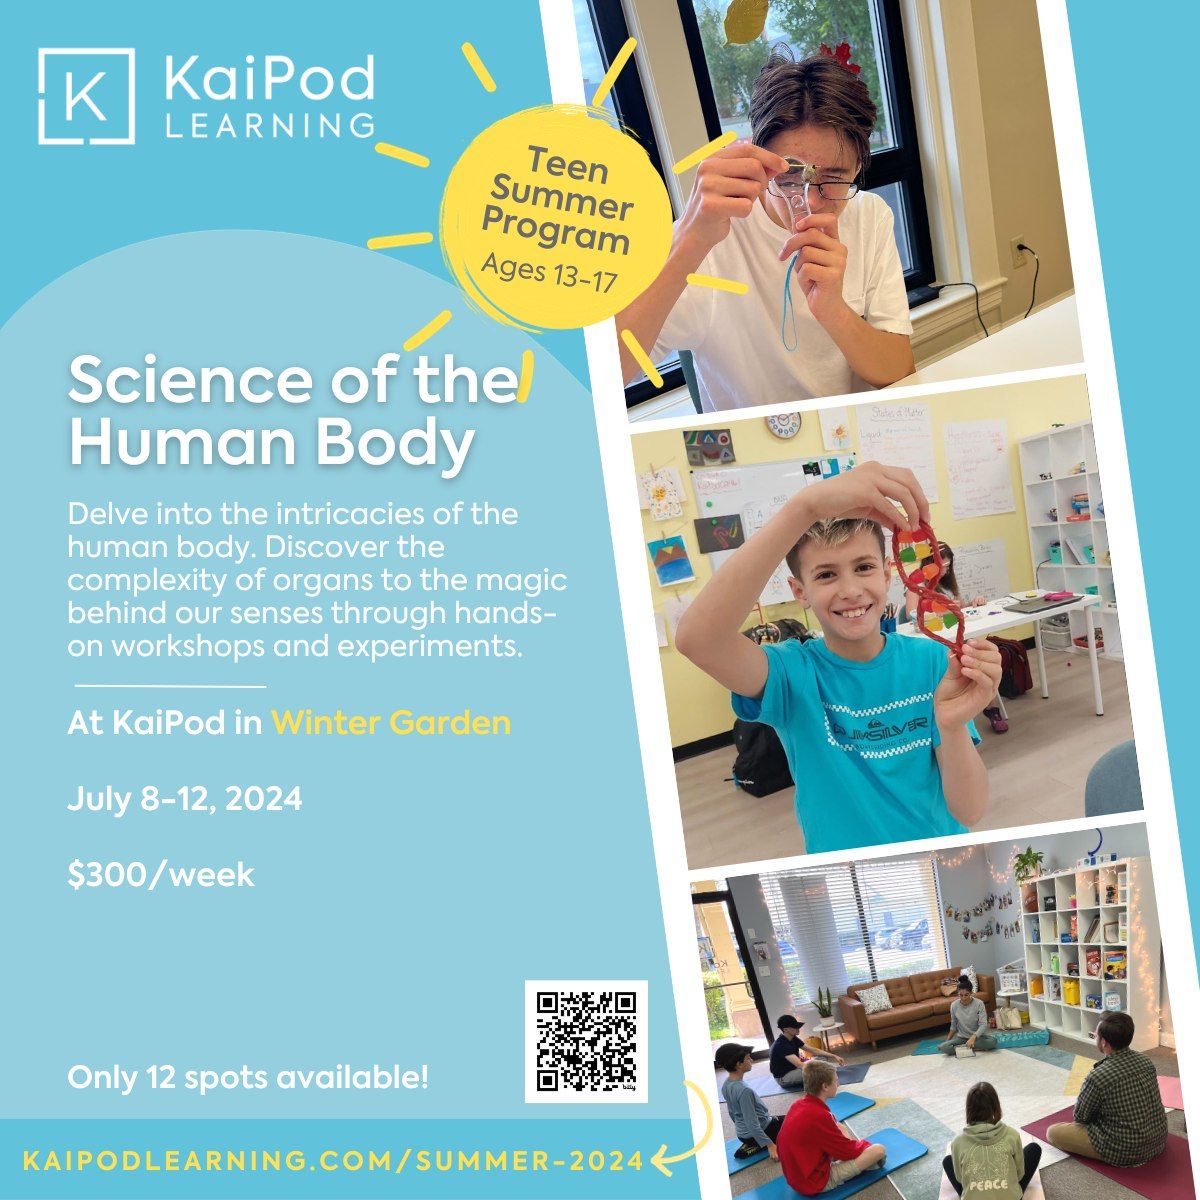 Science of the Human Body Summer Camp at KaiPod